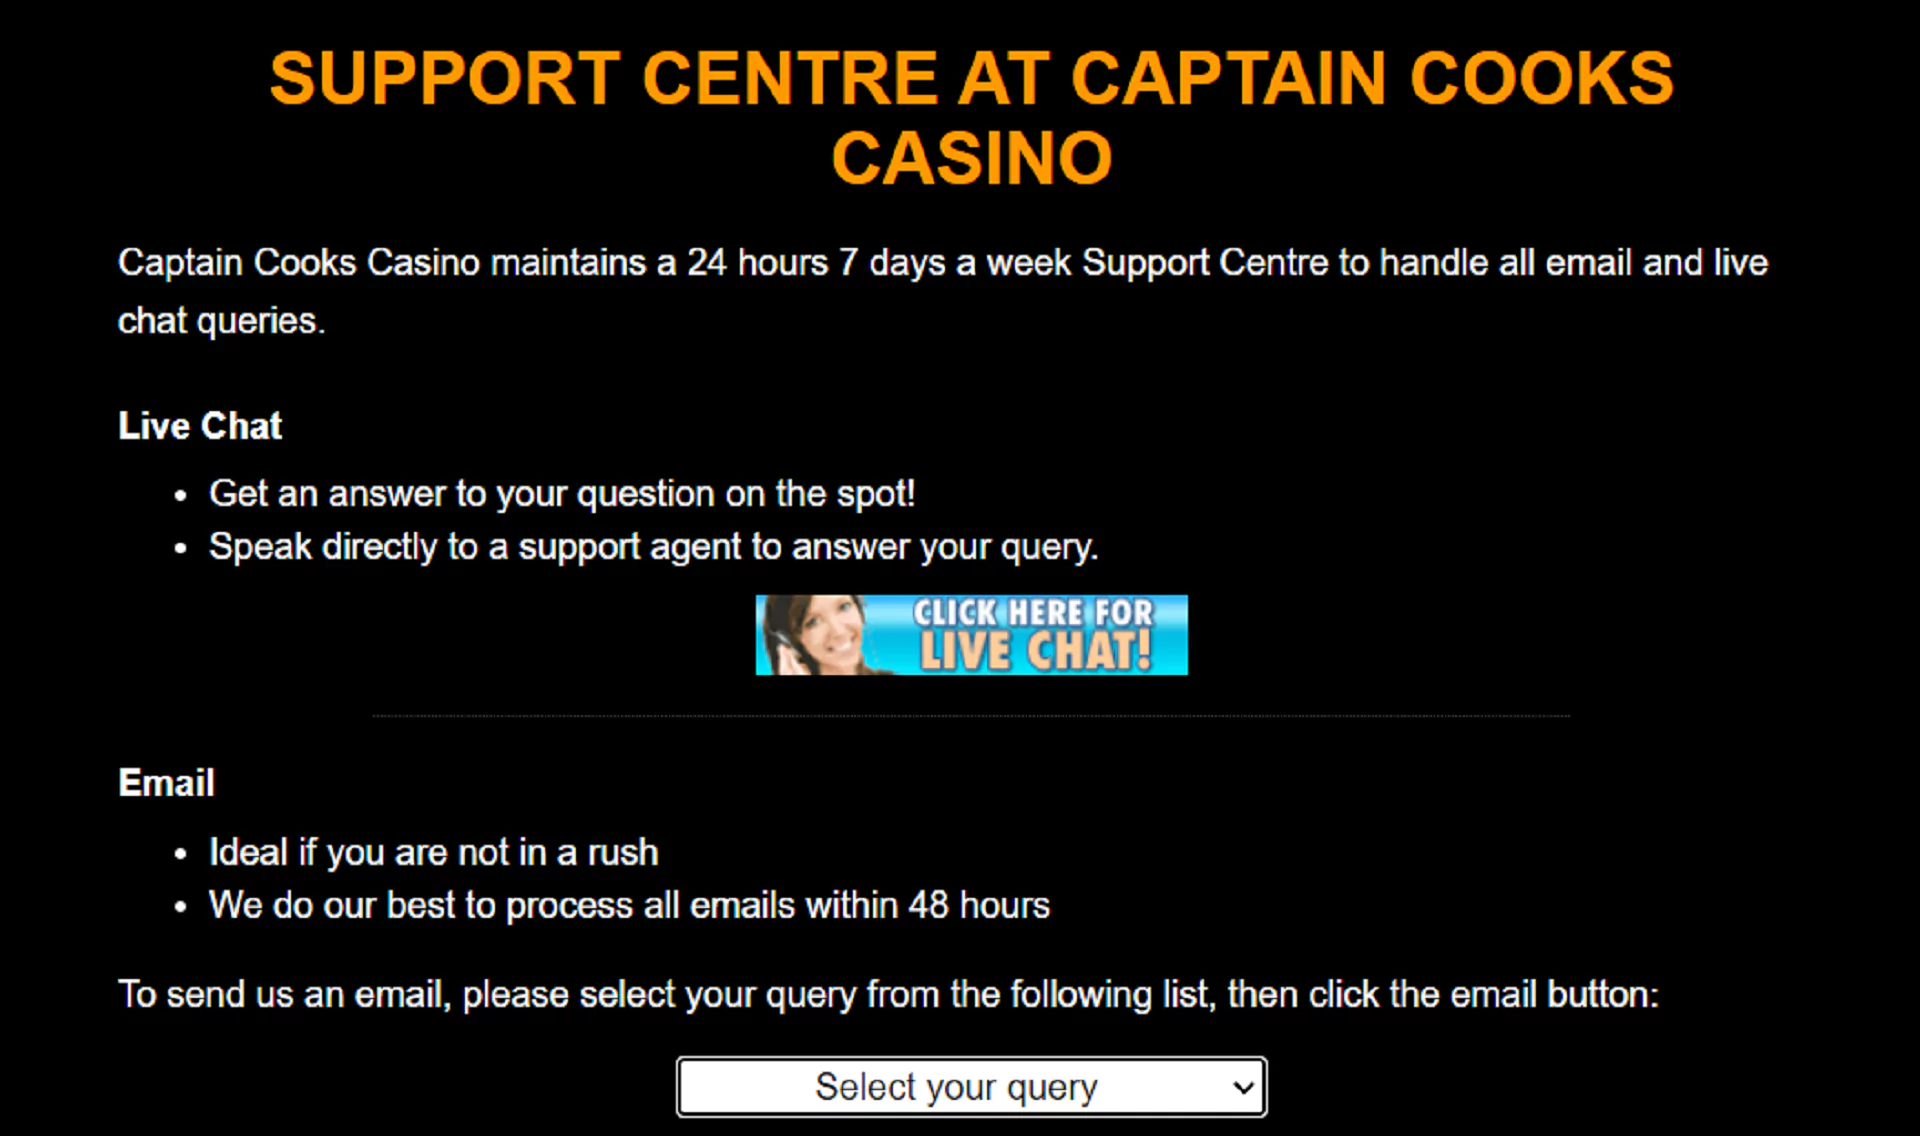 Screenshot of the customer support page on the Captain Cooks Casino website